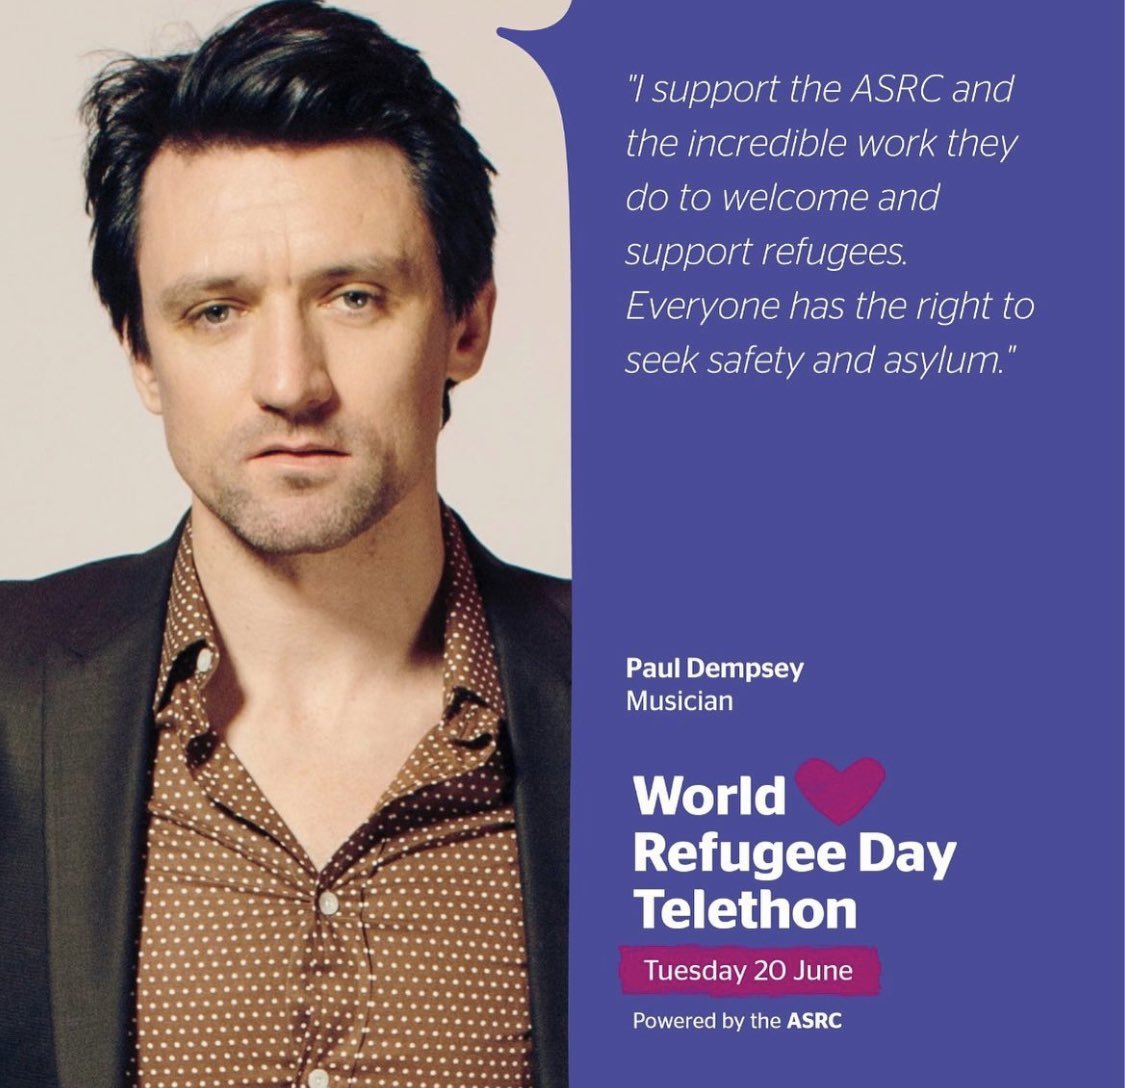 It’s World Refugee Day Telethon and @PaulDempsey is answering the phones at @ASRC1 taking donations from 6-8pm tonight ! Call 1300 692 772 or text HOPE to 0476 000 111 to donate $15.
#ASRCTelethon #WorldRefugeeDay